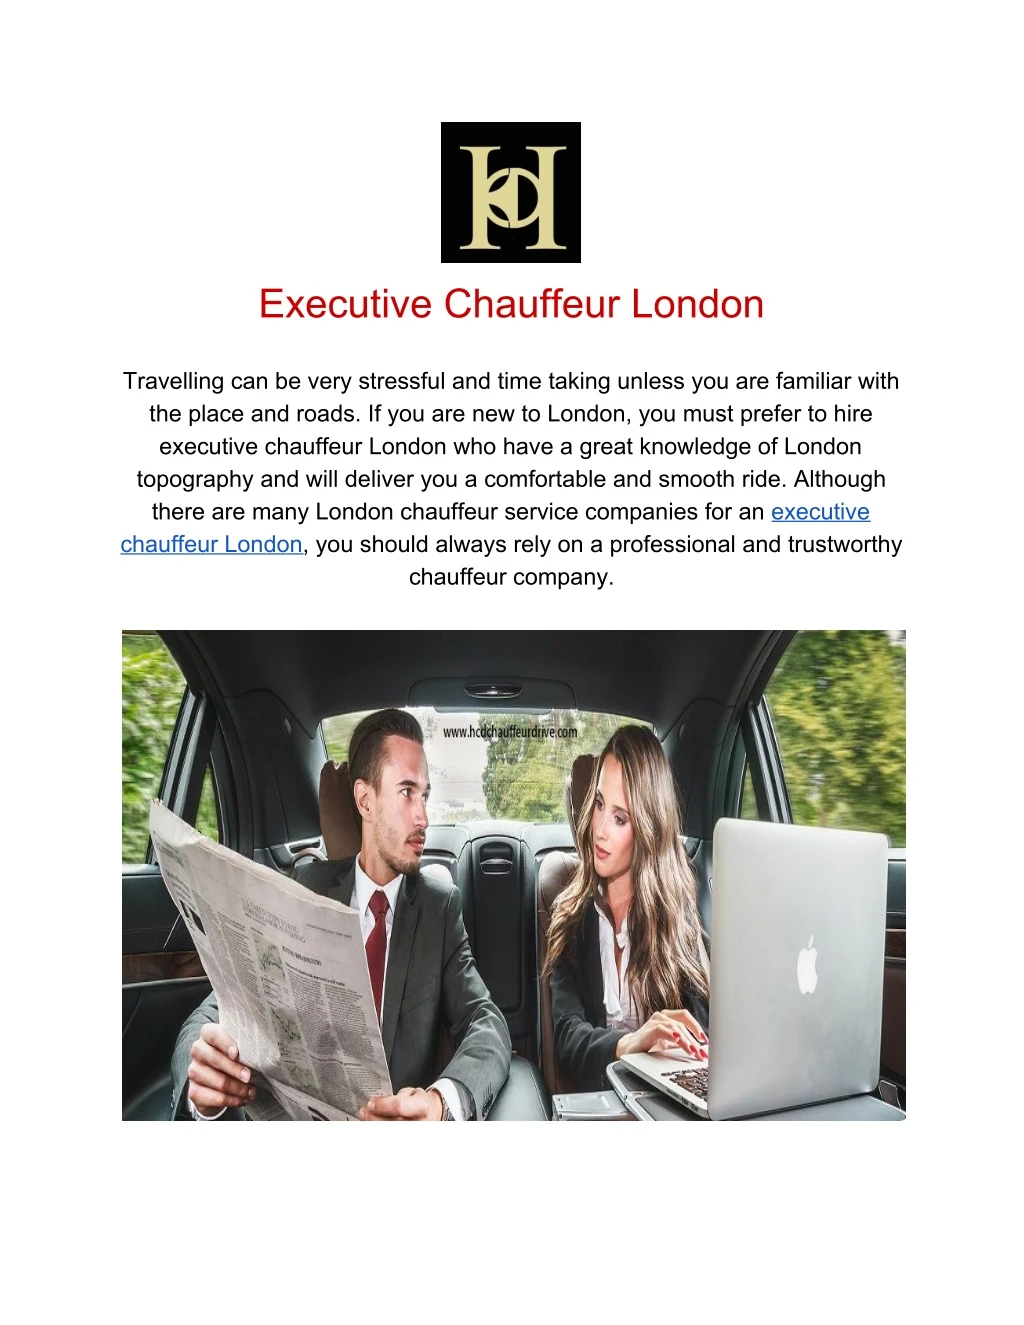 executive chauffeur london travelling can be very